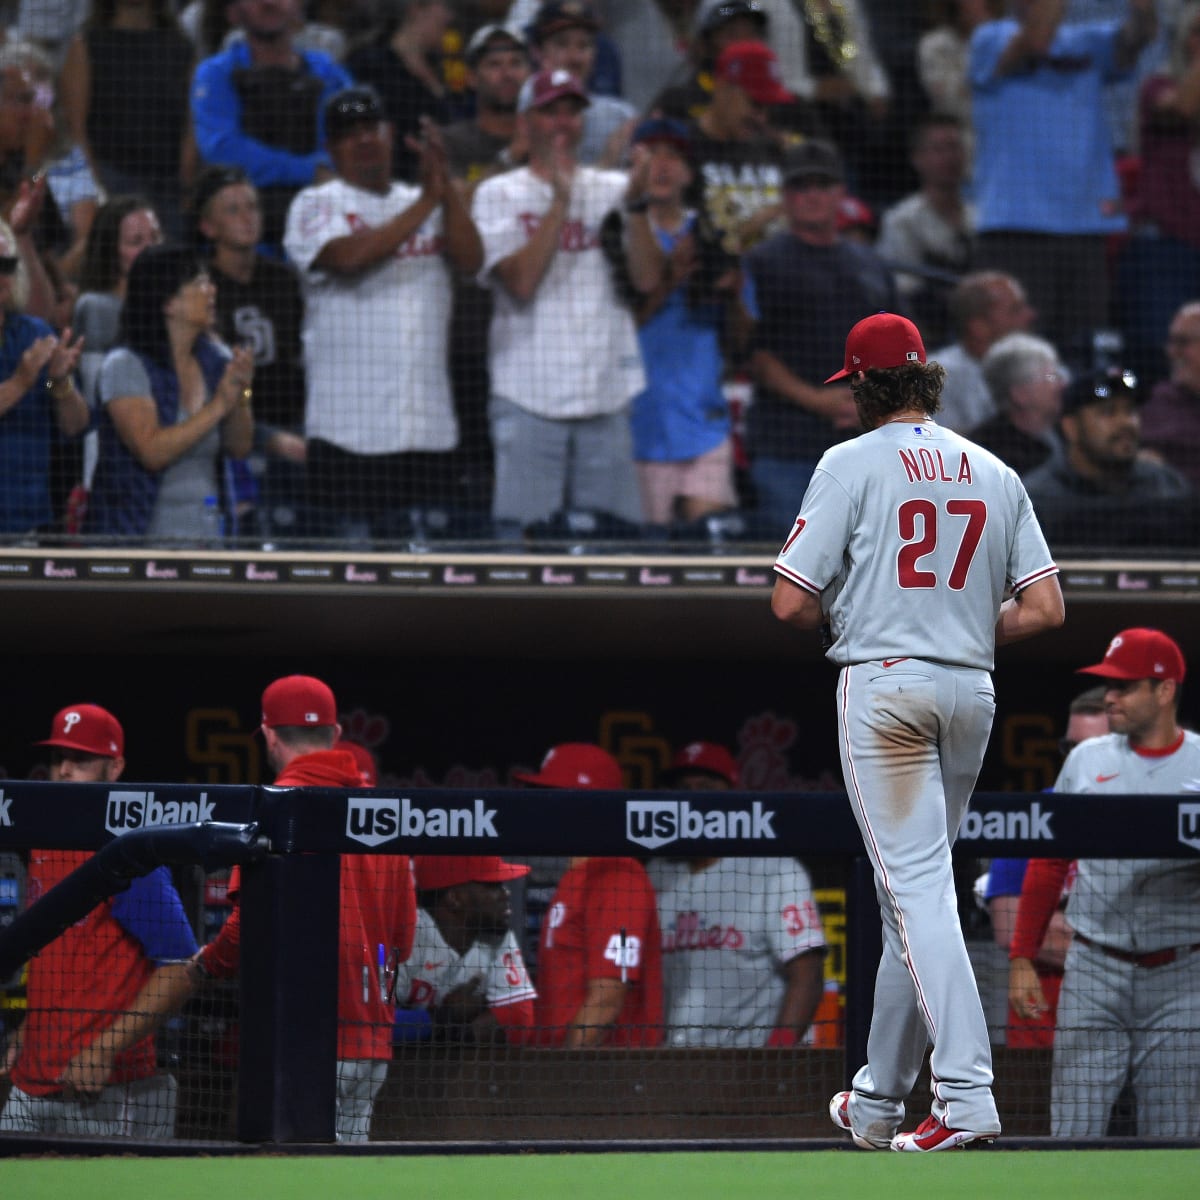 MLB Friday Stat Insights for Phillies vs Mets, Aaron Nola, Tylor